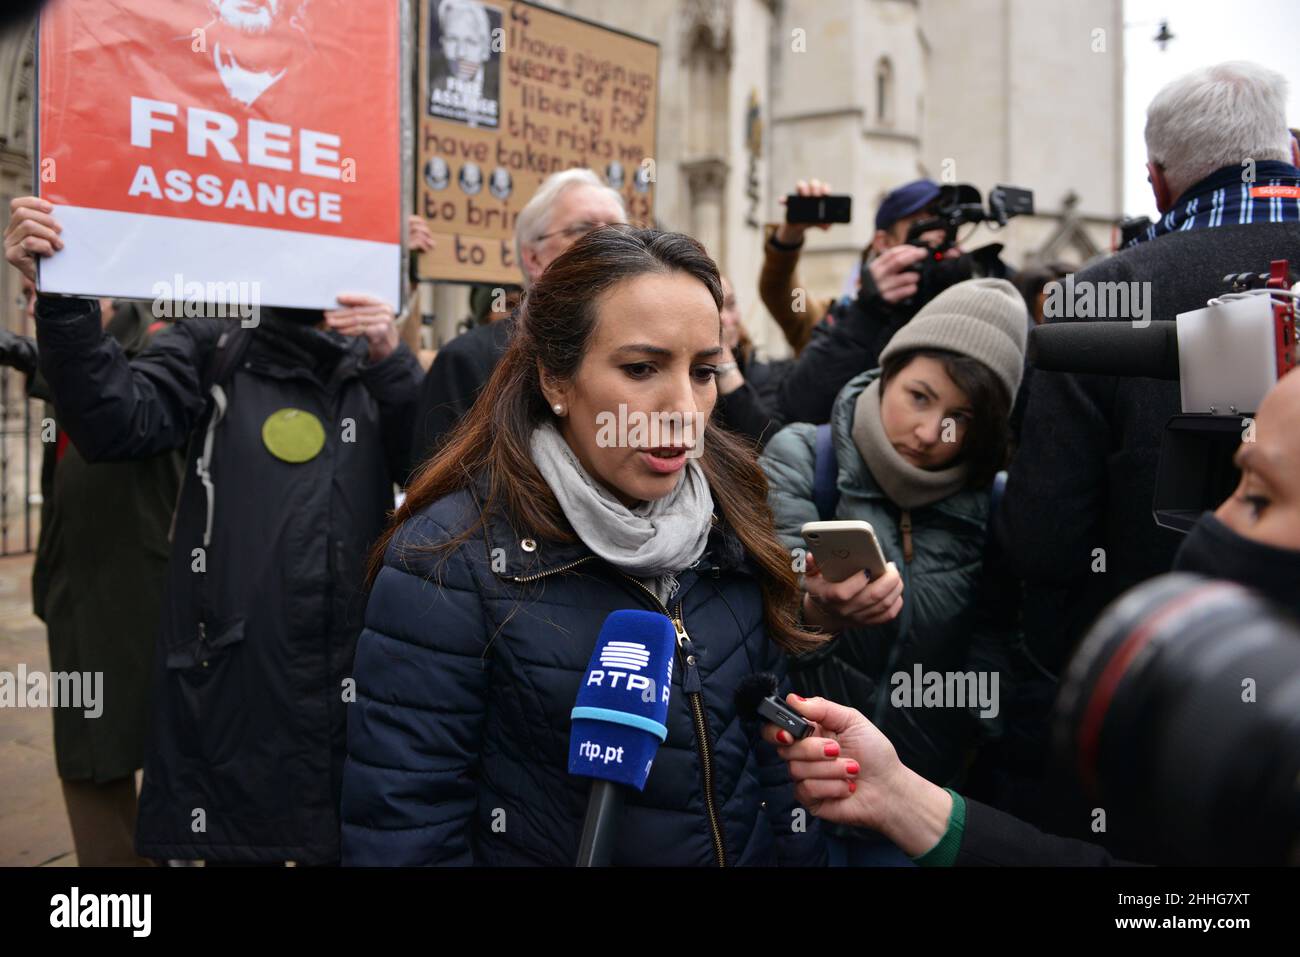 Julian Assange's fiancee Stella Moris speaks to the media outside The Royal Courts of Justice in London. Assange granted permission to seek extradition appeal at UK's top court. Stock Photo